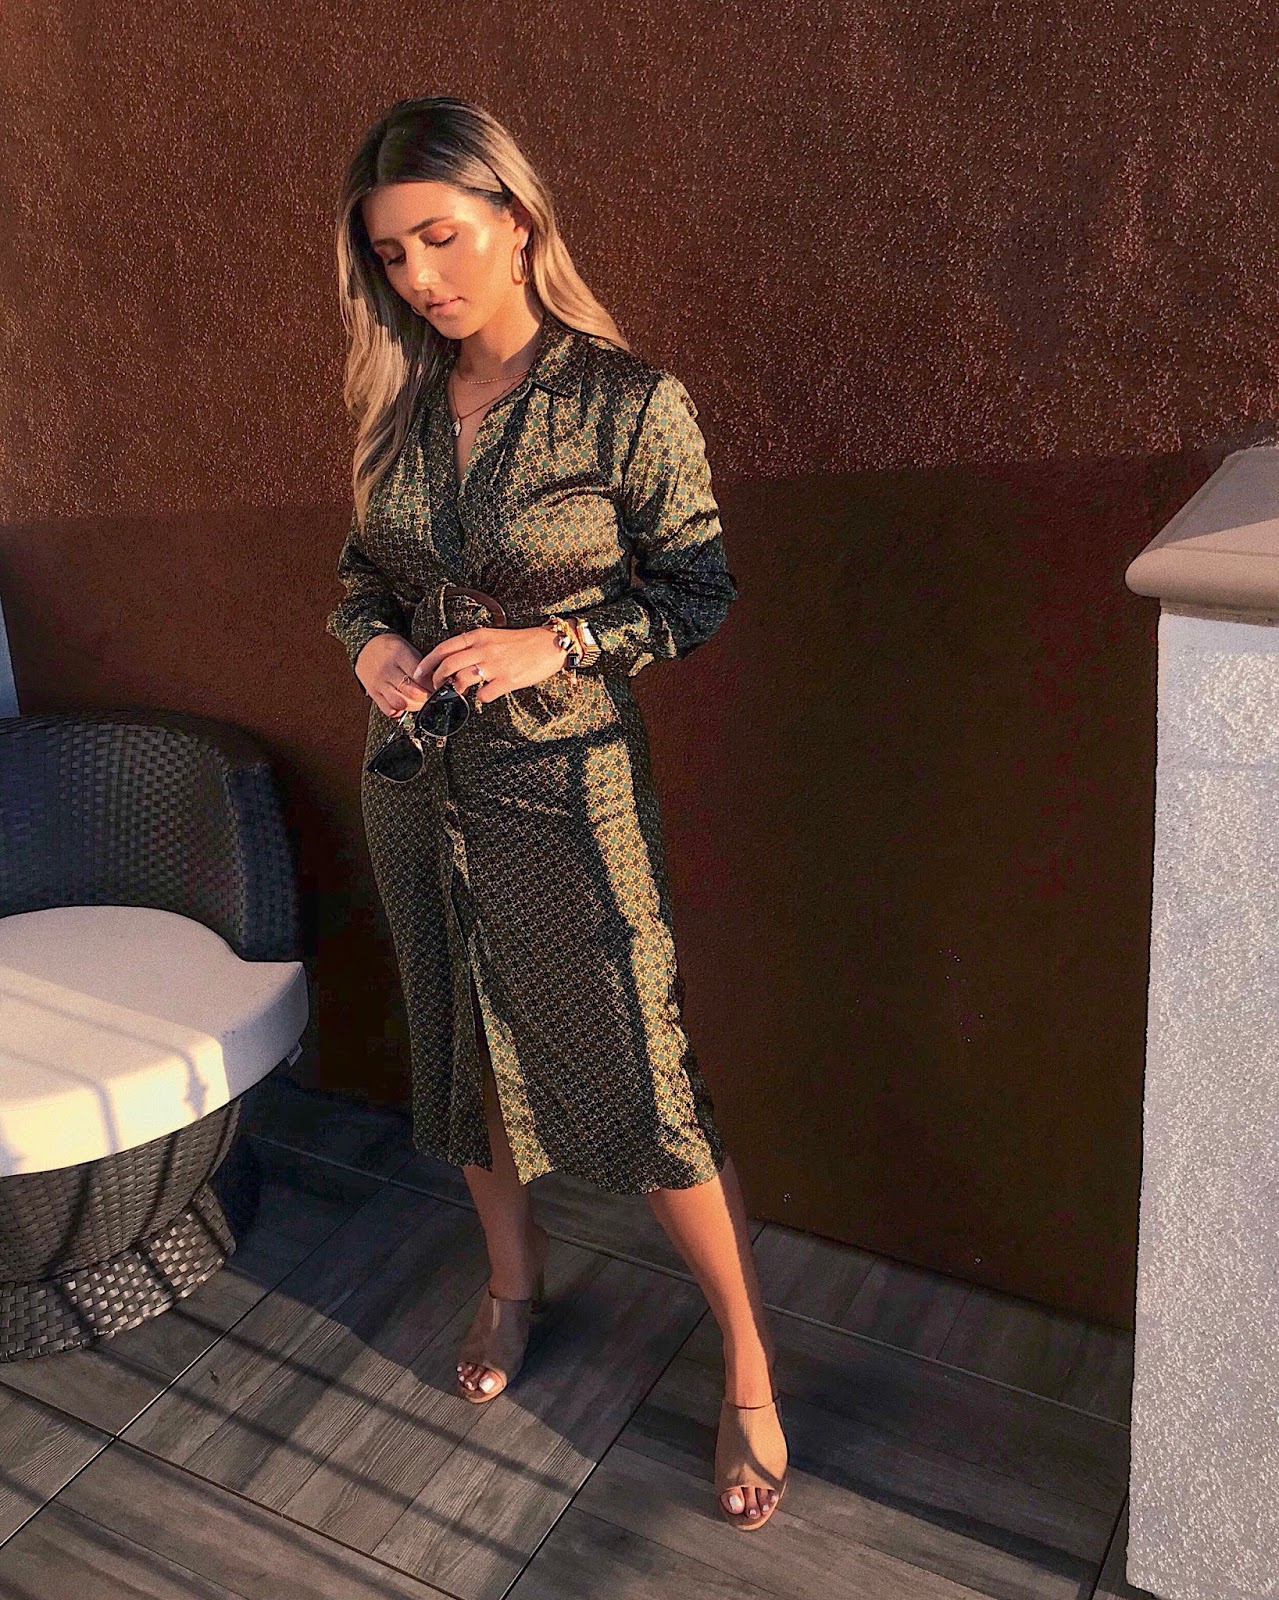 must have fall dresses, affordable dresses for fall, fall 2018, a/w 2018 fashion, midi dresses, Parmida Kiani, how to style, fashion tips, outfit Inspo, zara dress, how to layer under dresses, comfortable fashion, office look, casual work look, Persian, blonde hair, mules, quay Australia, fashion favorites, ootd, golden hour, Los Angeles blogger, LA blogger, LA fall fashion